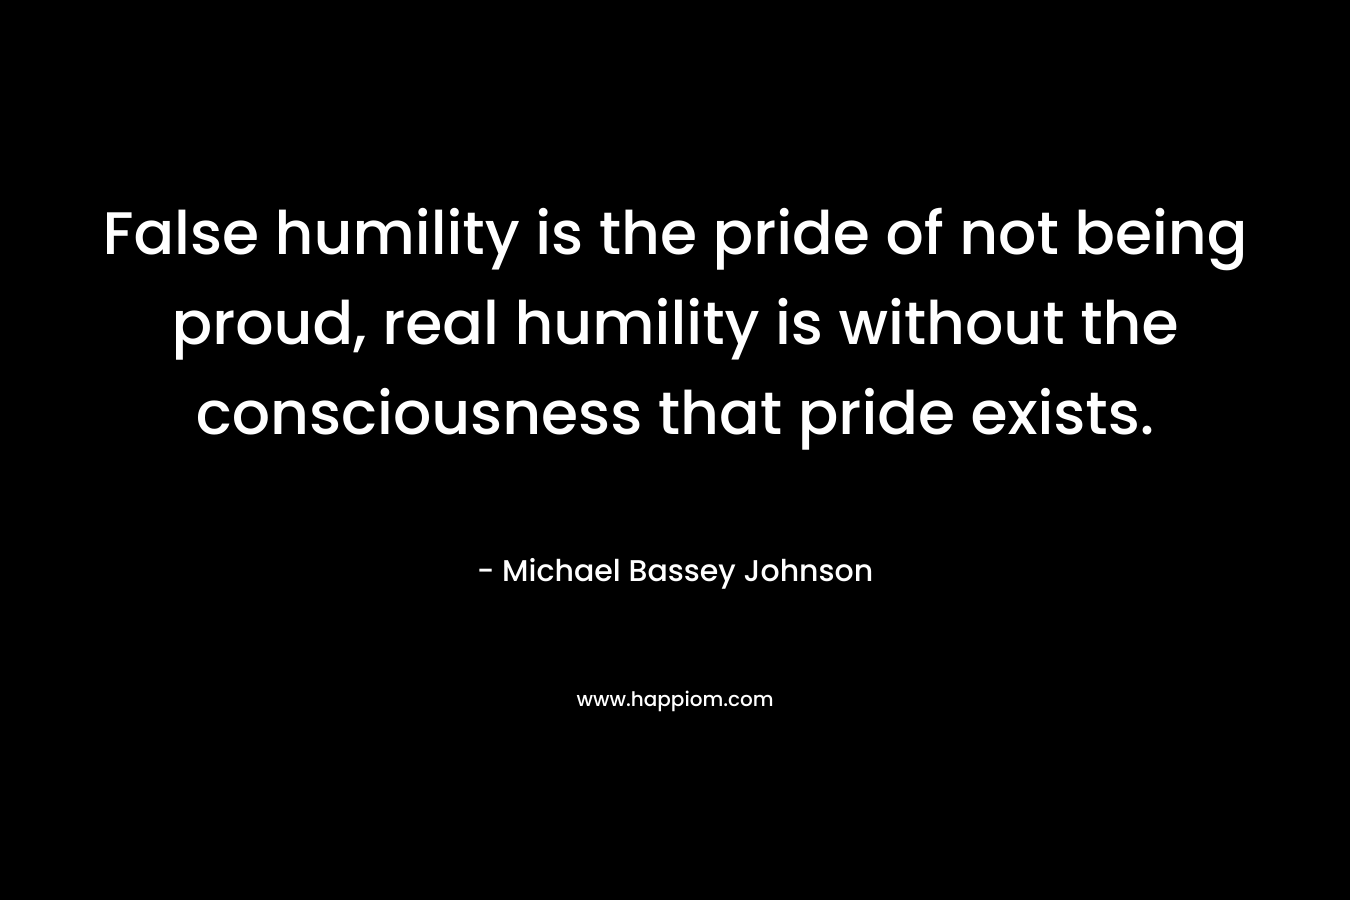 False humility is the pride of not being proud, real humility is without the consciousness that pride exists.